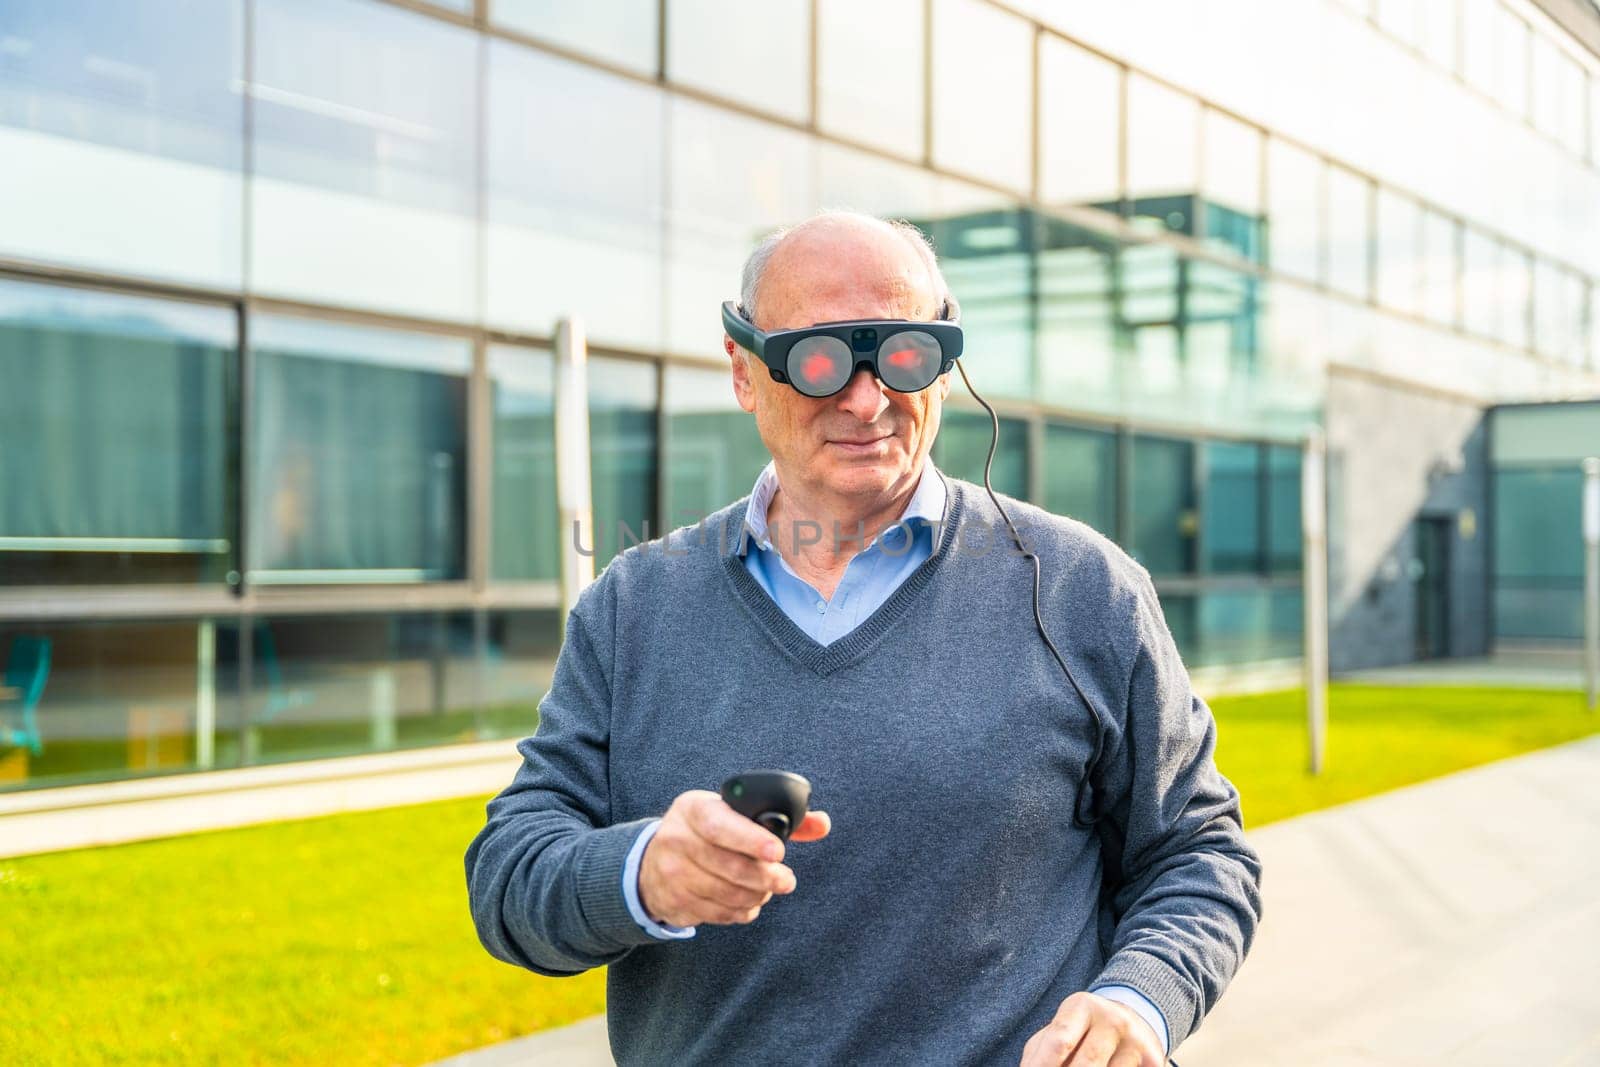 Elder businessman using an augmented reality device outdoors by Huizi